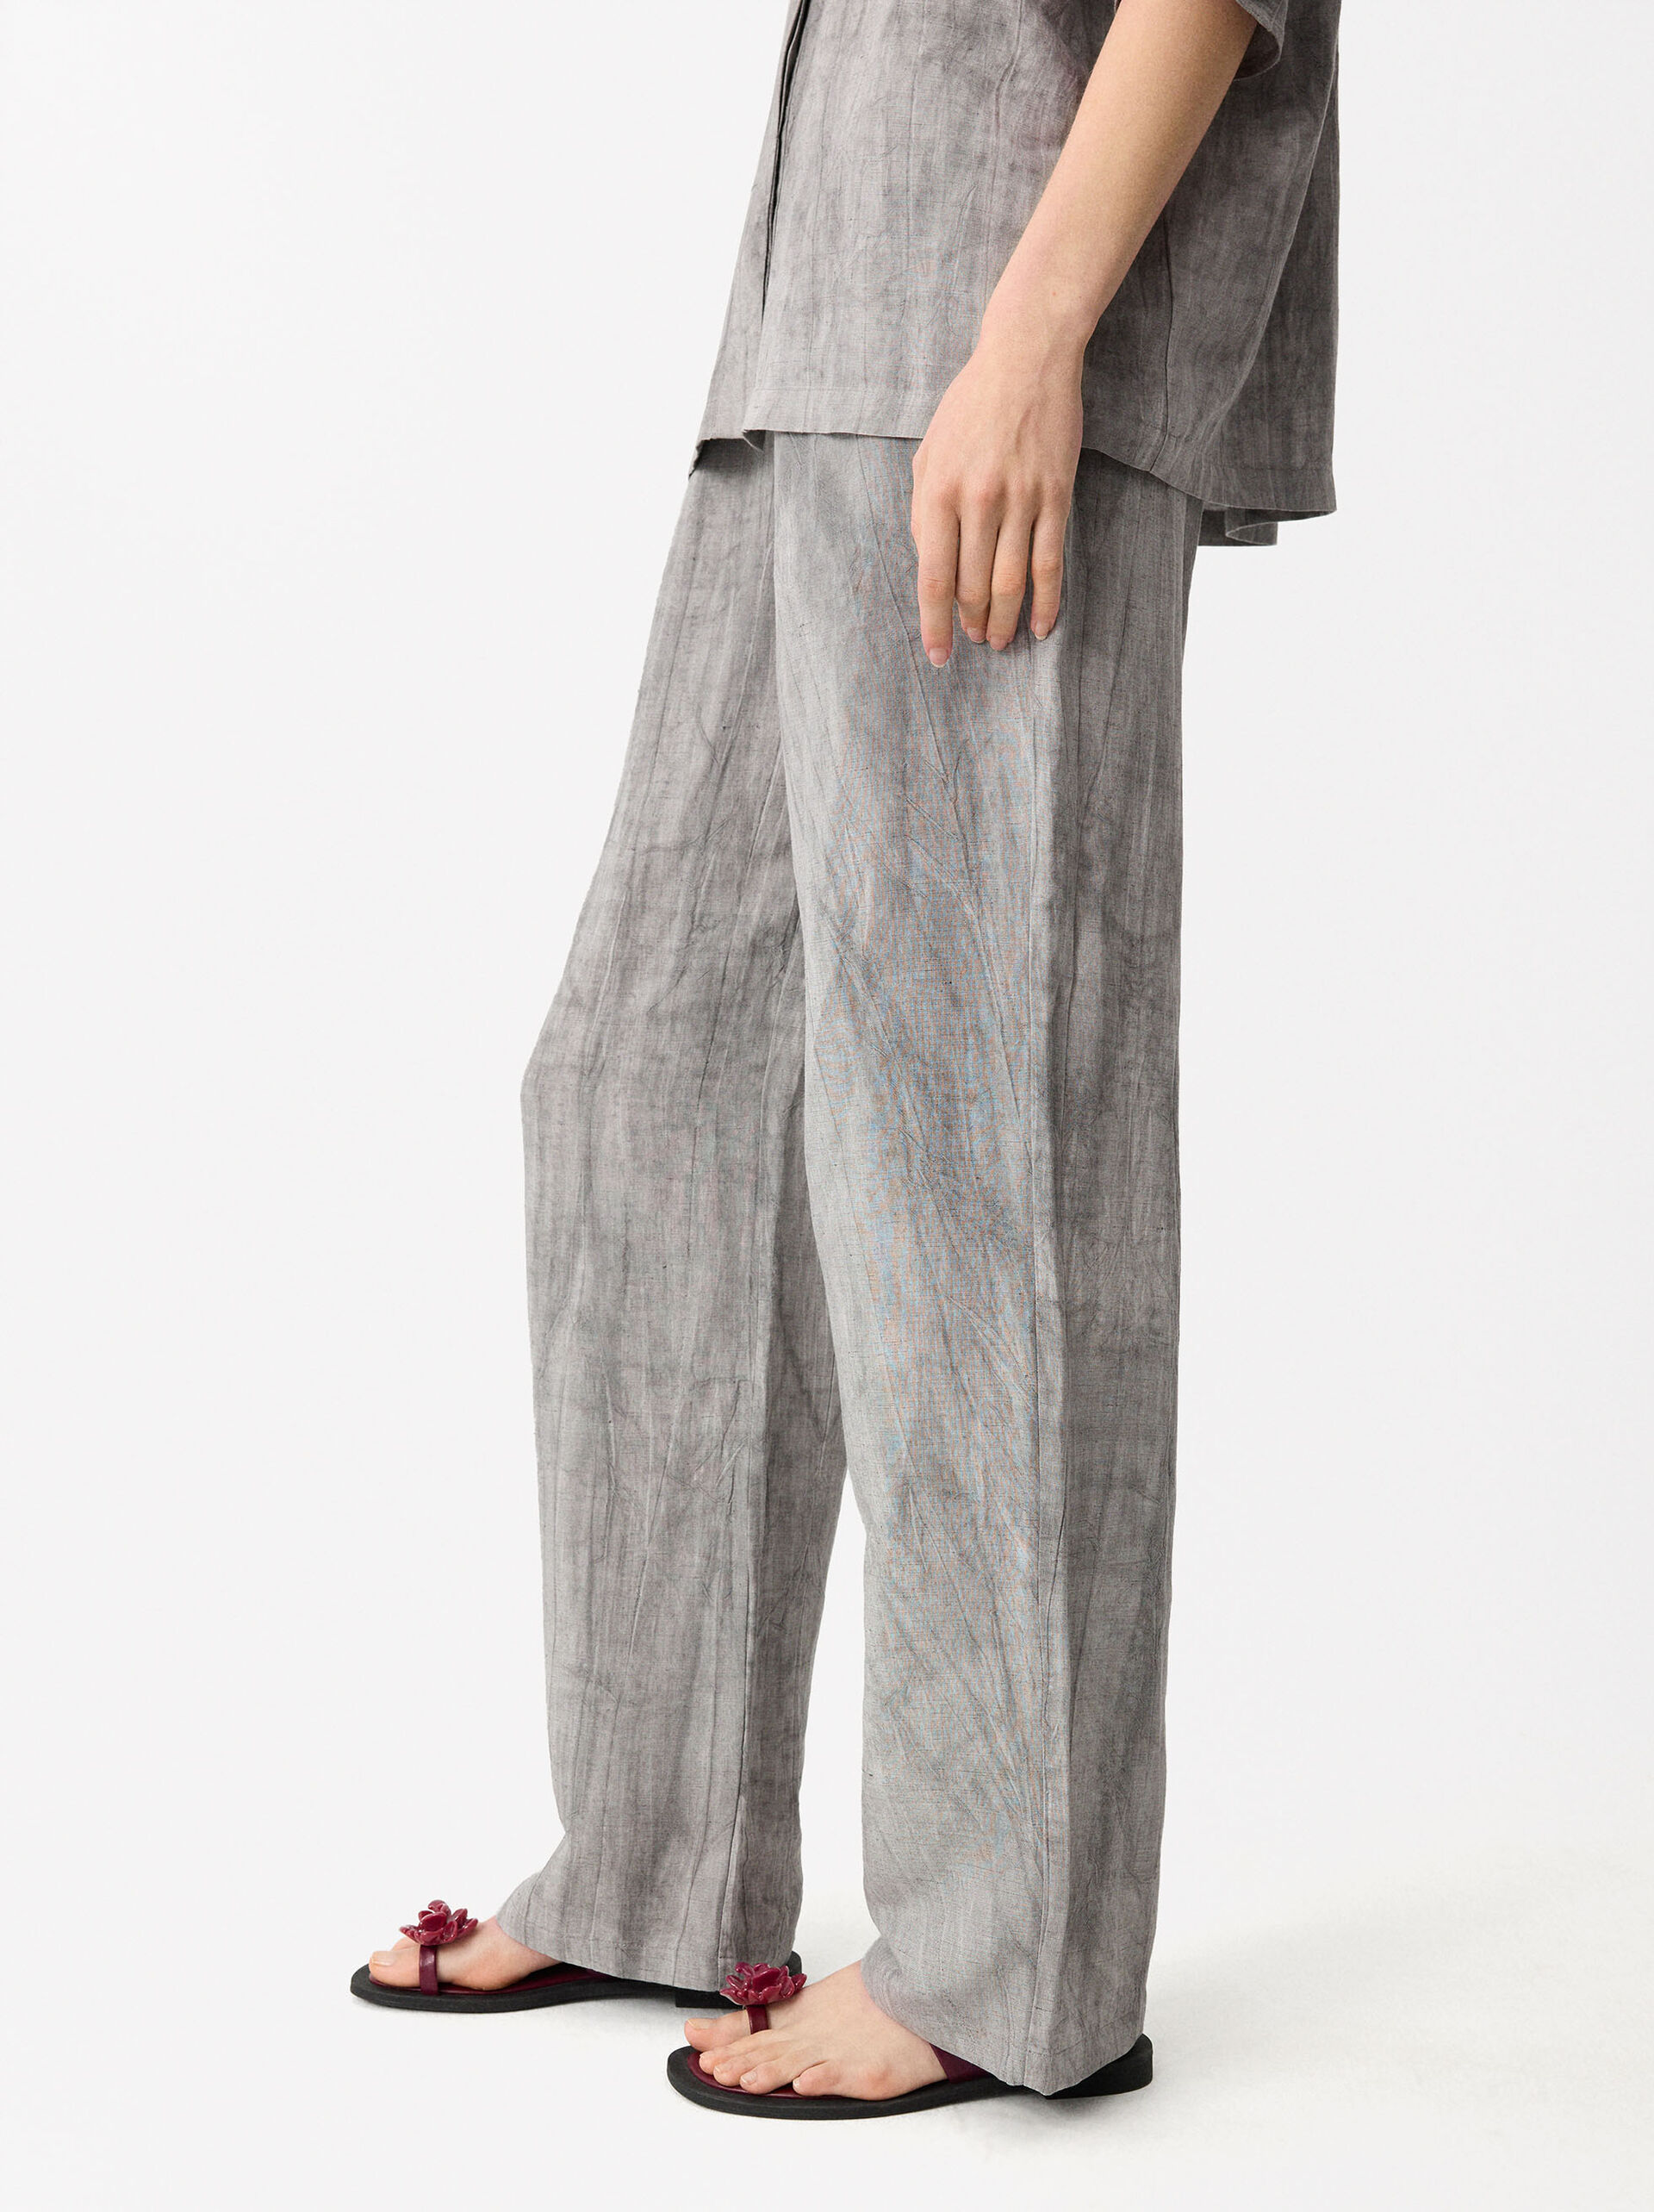 Printed Loose-Fitting Trousers image number 3.0